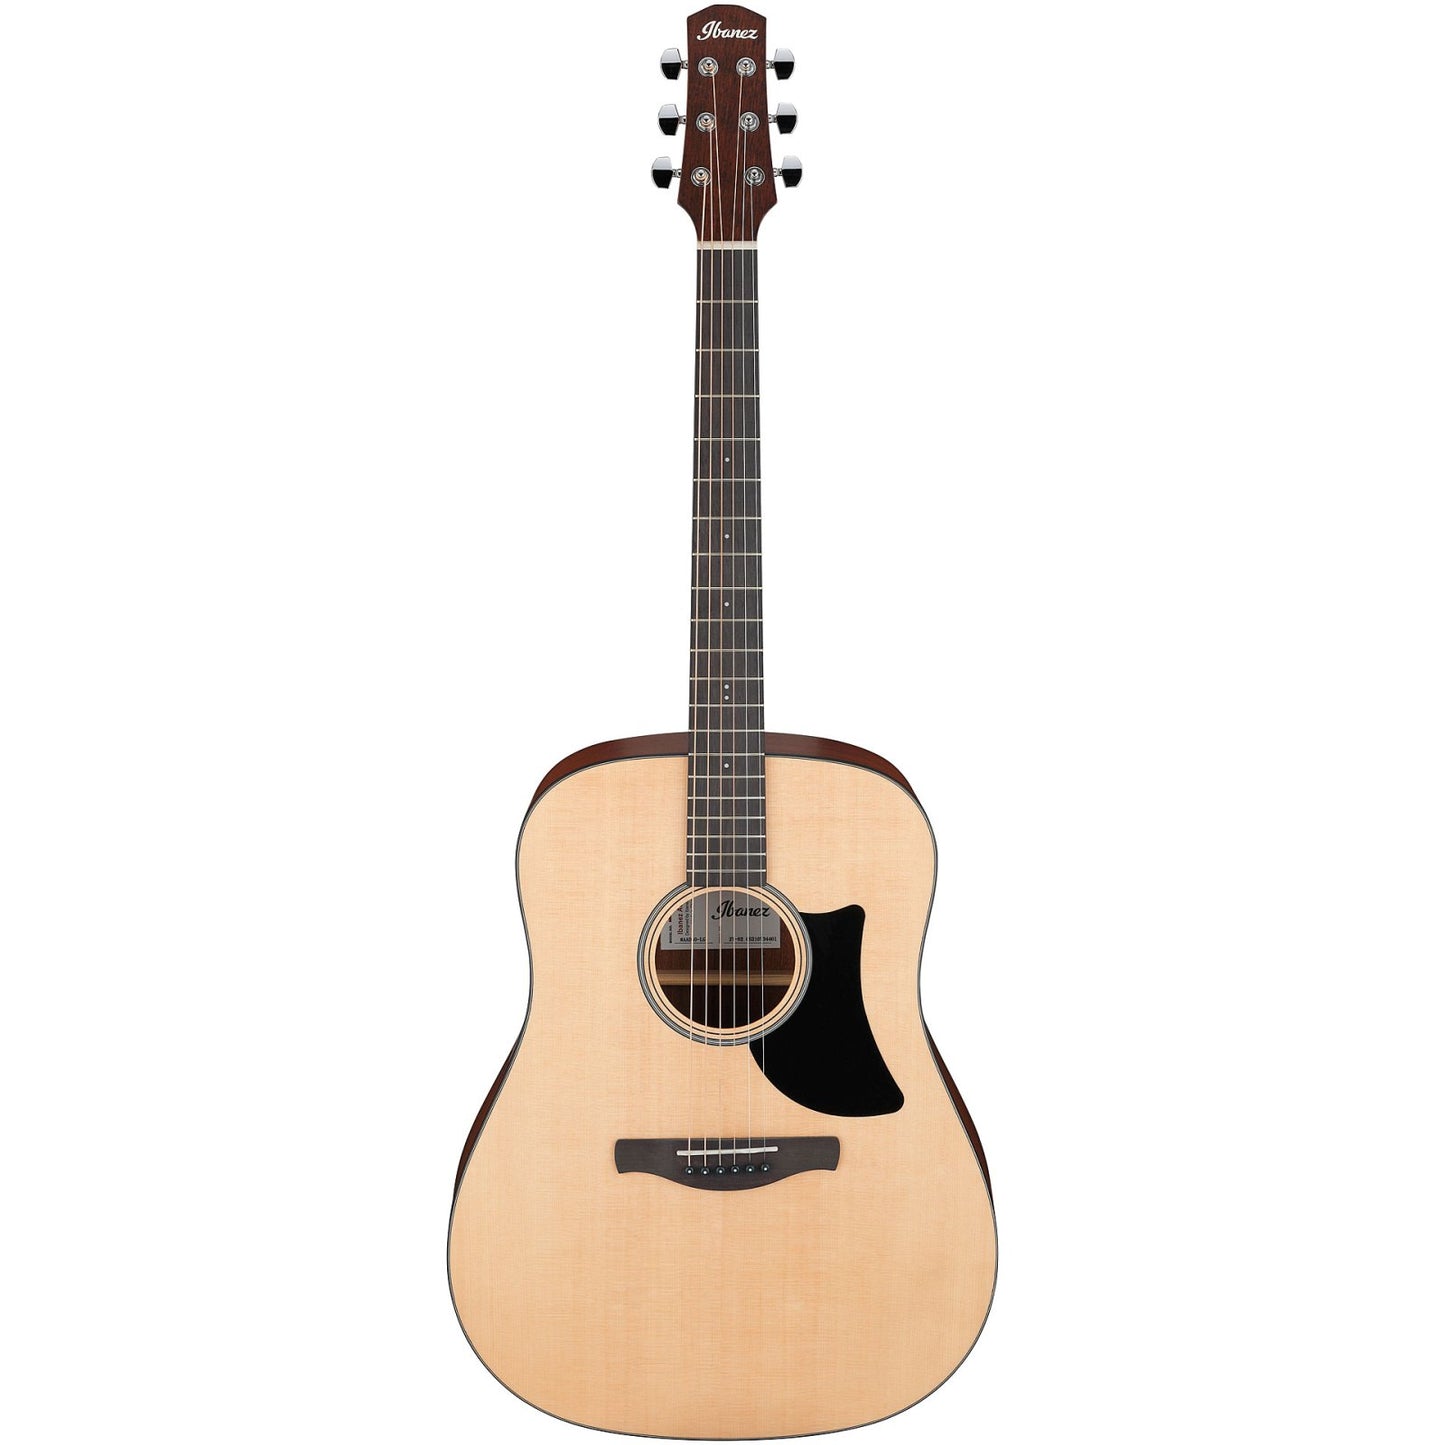 Ibanez AAD50 Advanced Acoustic Series Grand Dreadnought Guitar (Natural Low Gloss)